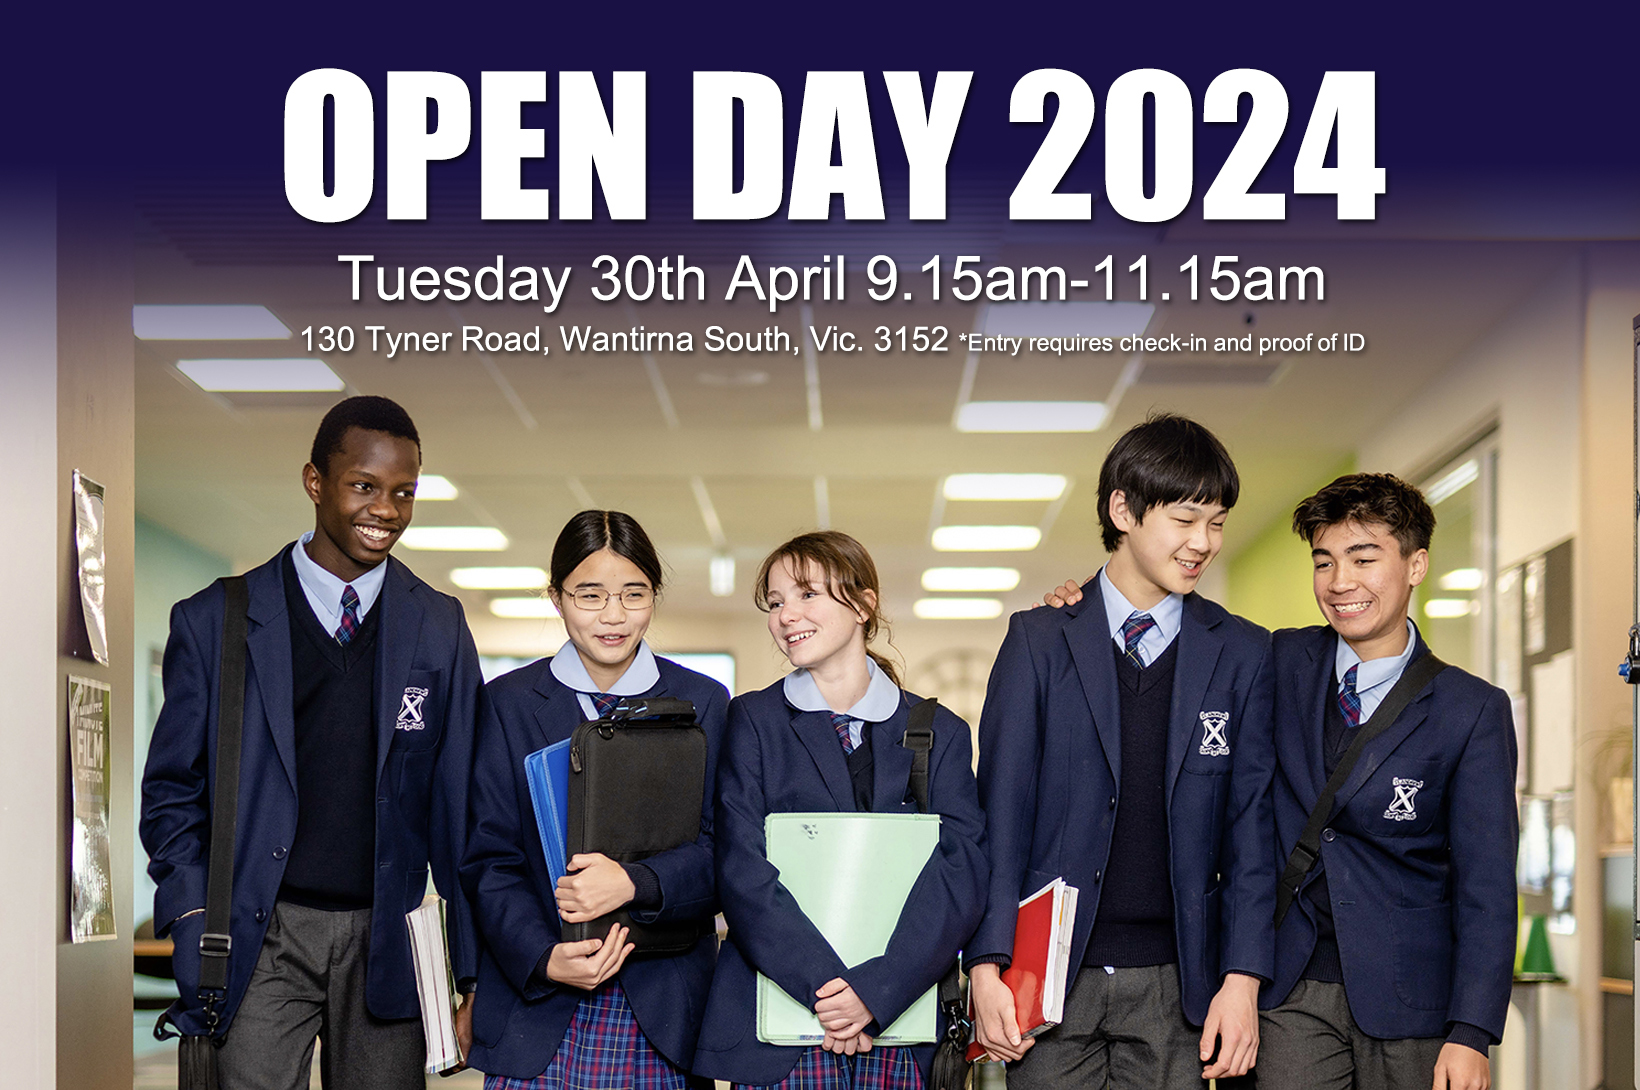 Open Day - April 30